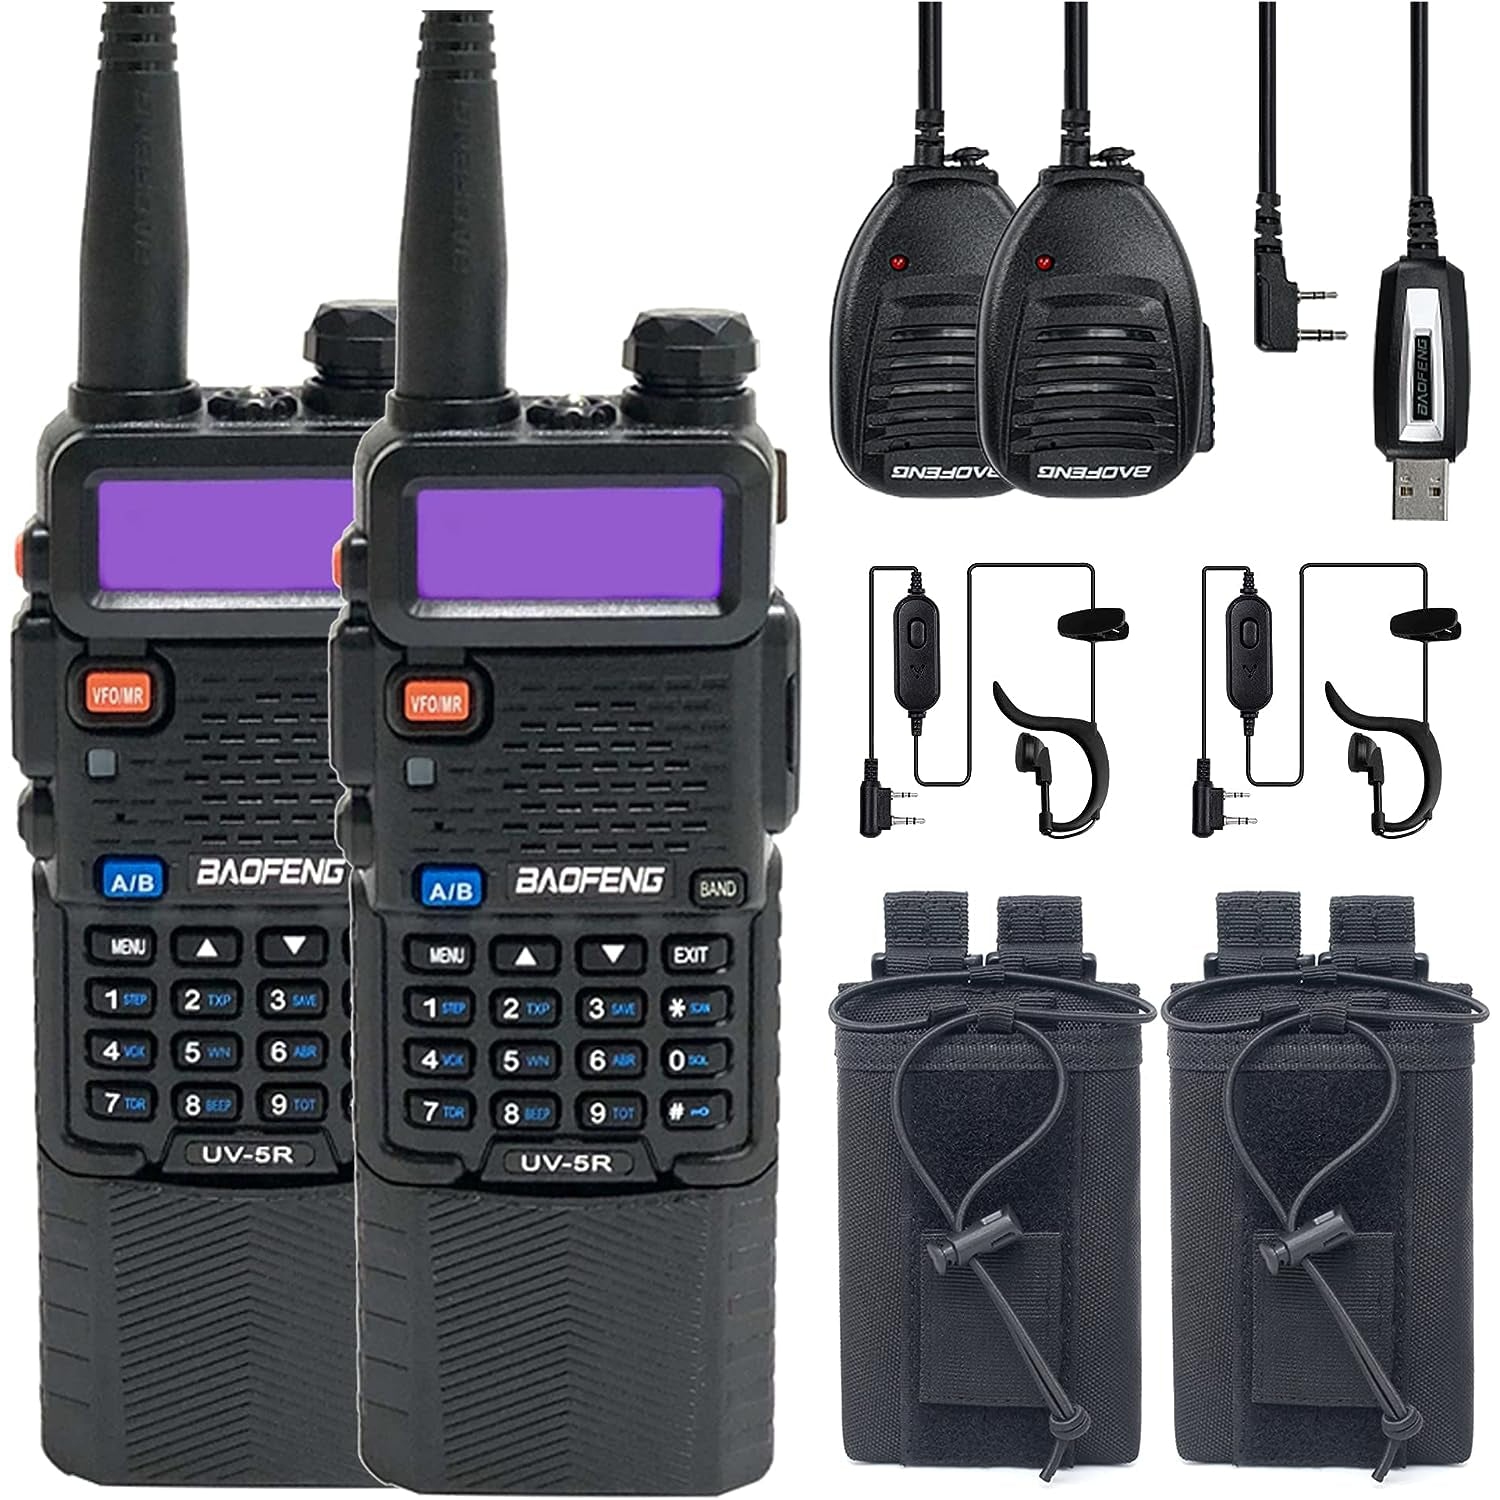 UV-5R 5W Handheld Radios A Set of with 3800mAh Batteries, Cases, Hand  Mics, Earpieces, and One Cable included. Best Buy Canada